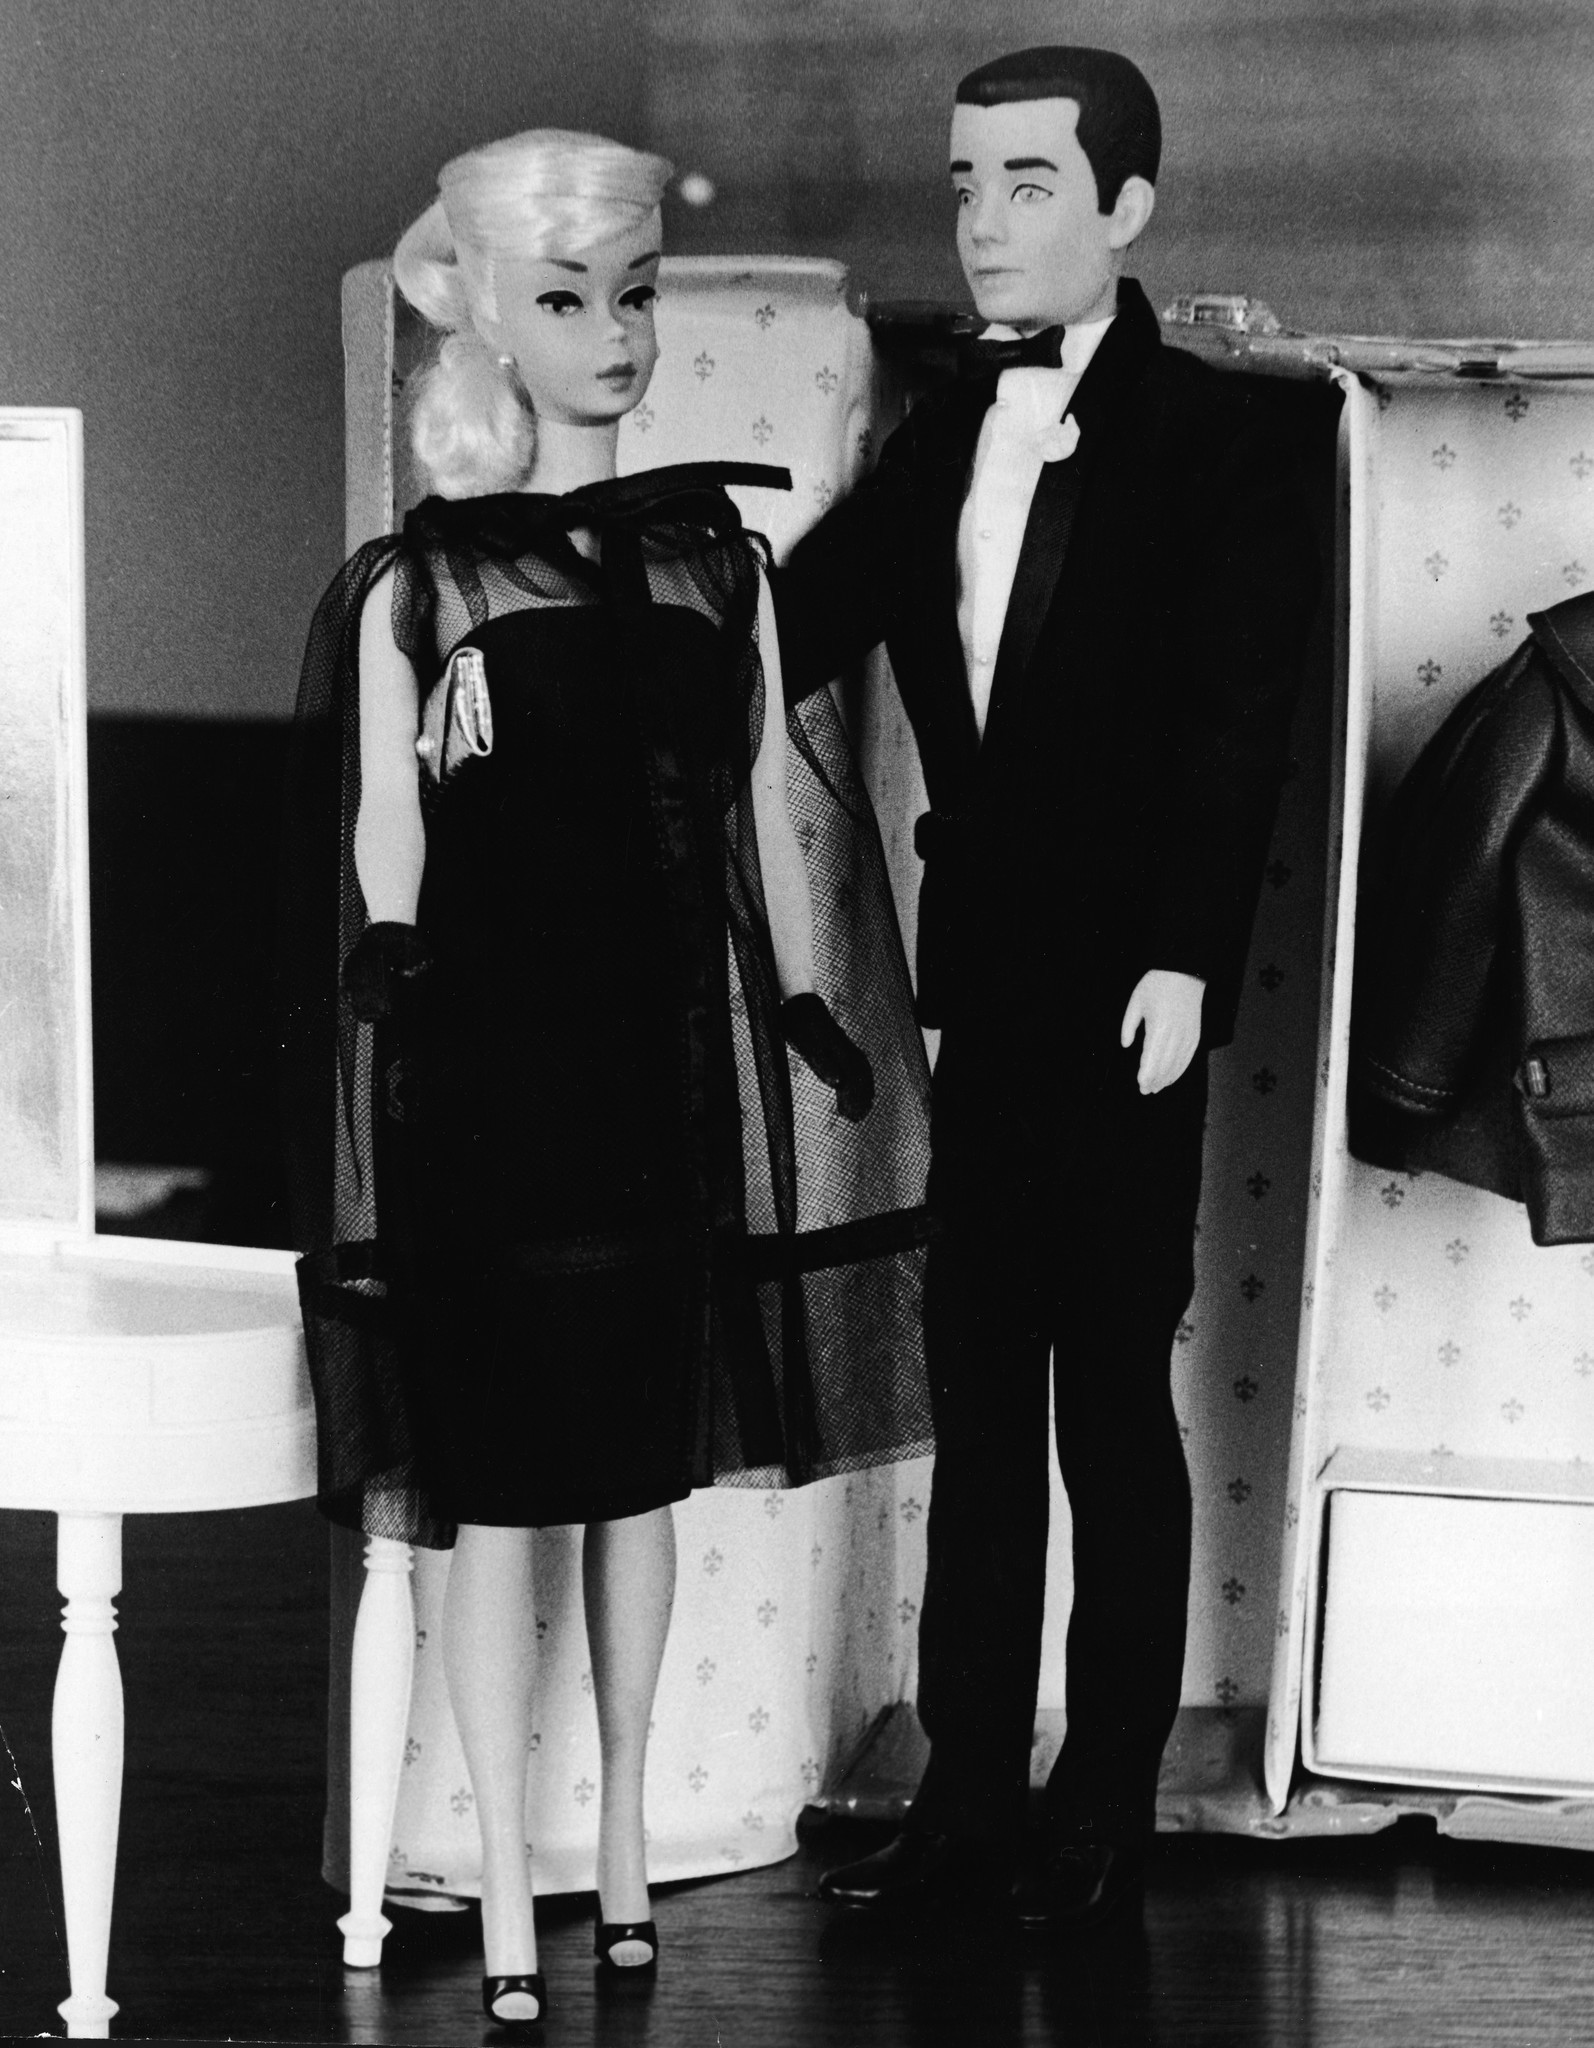 Formal wear Barbie & Ken are posed together in front of a toy closet on Dec. 15, 1964.